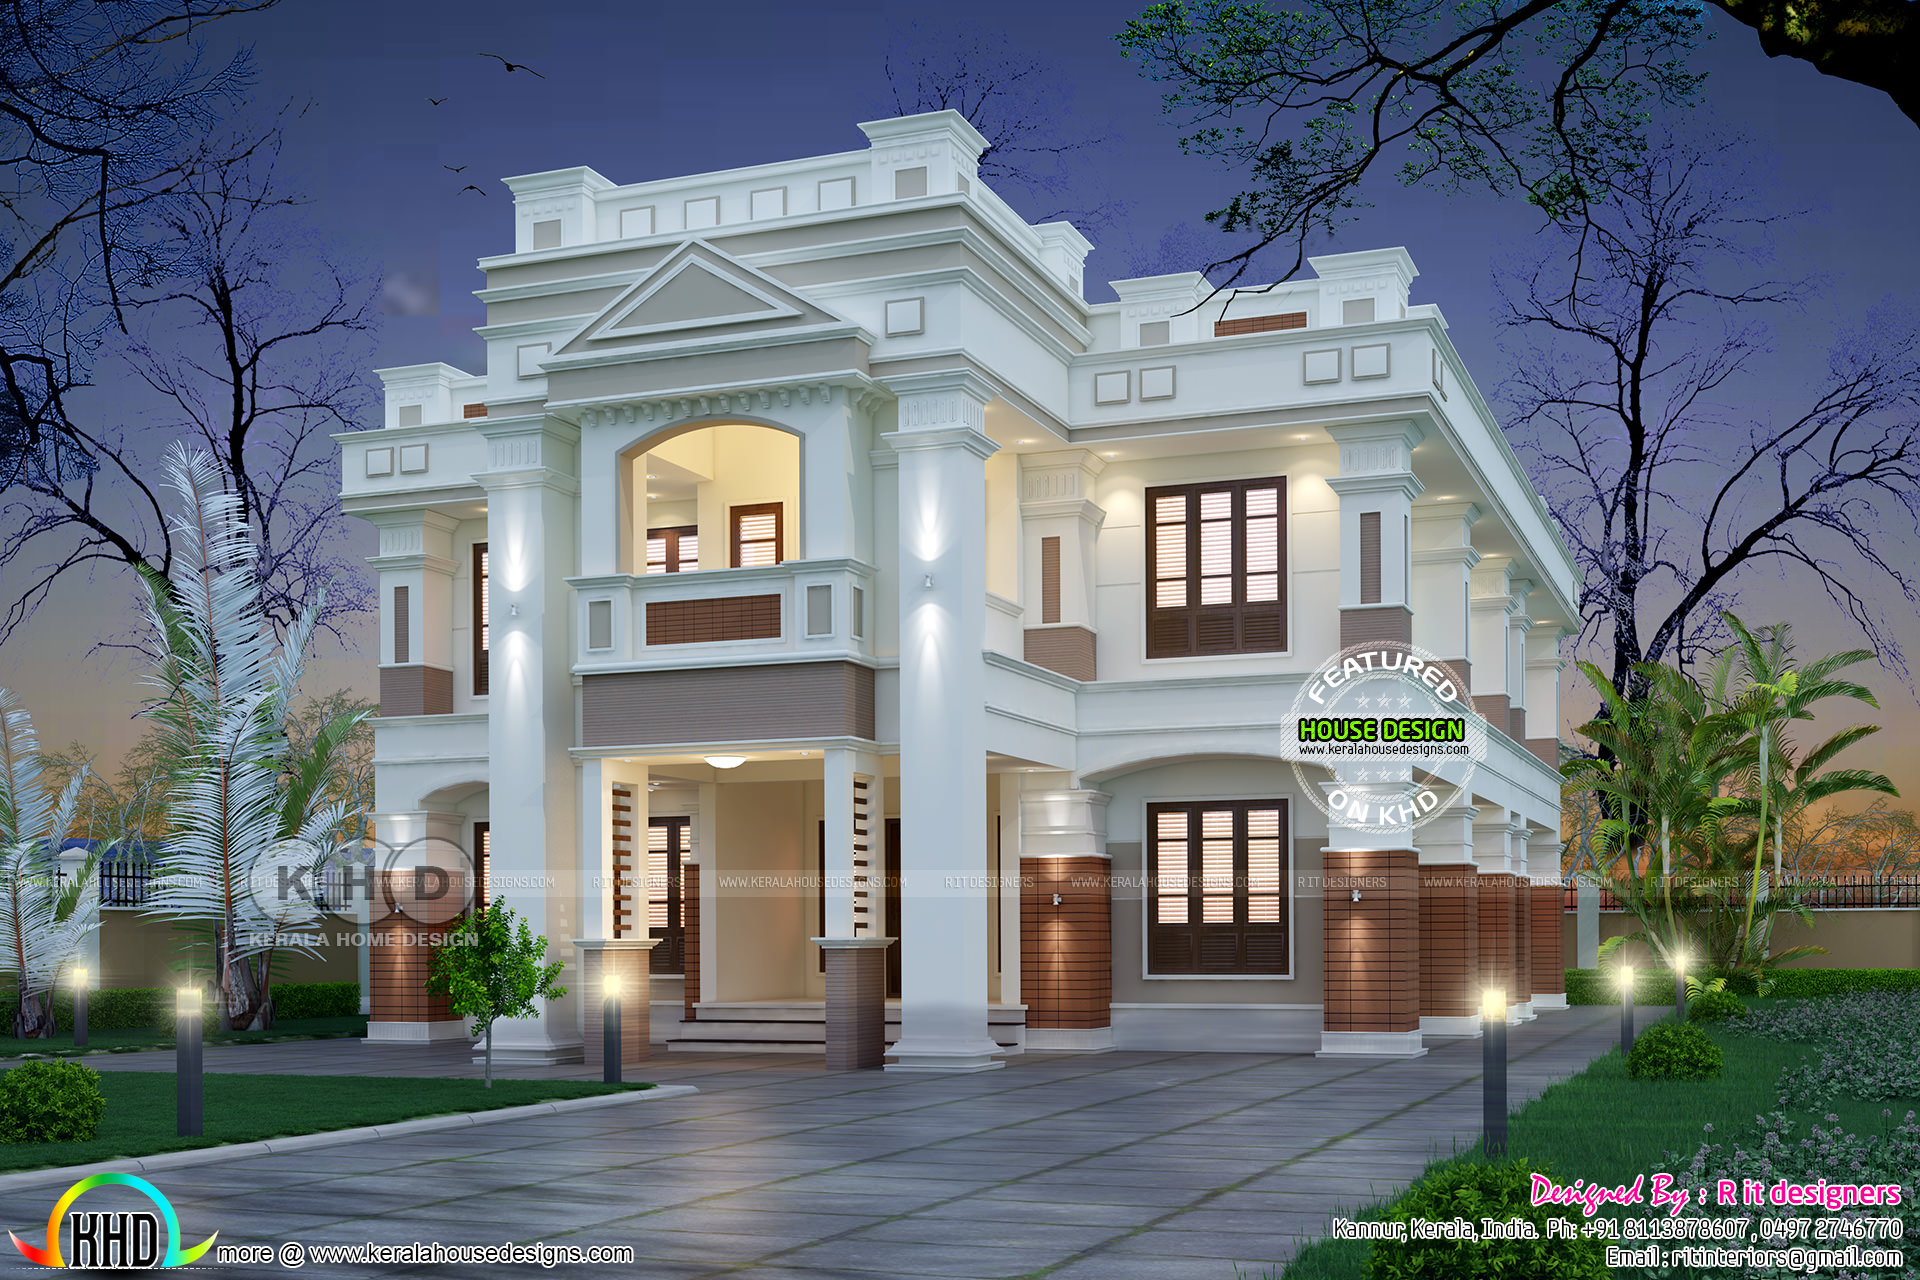  Modern  Colonial  type home  plan  with 4 bedrooms Kerala 